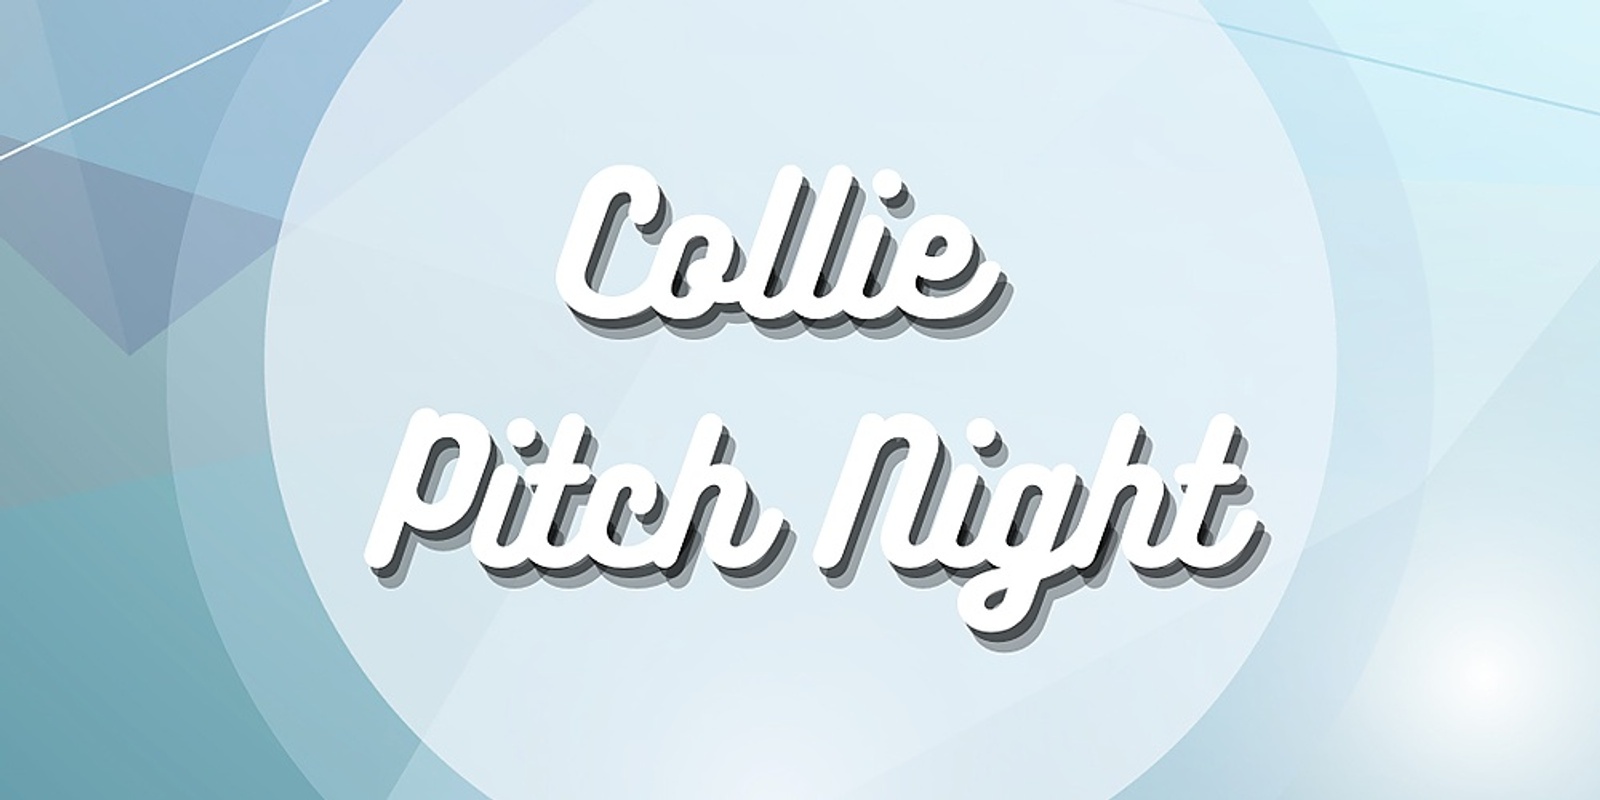 Banner image for Collie Pitch Night